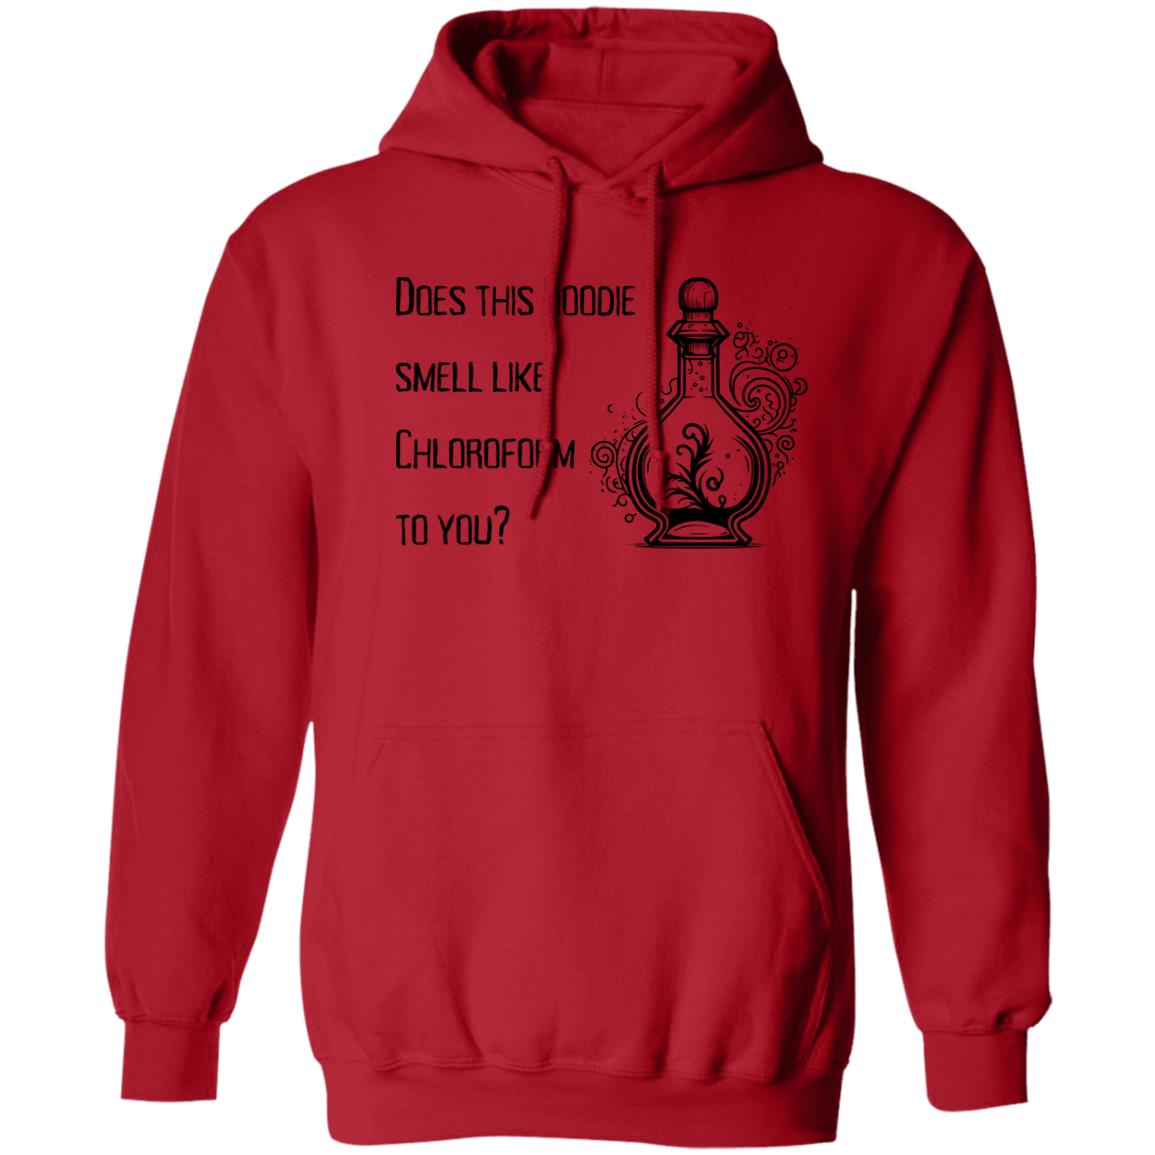 Does This Hoodie Smell Like Chloroform To You Does This Hoodie Smell Like Chloroform to You? Hoodie Sweatshirt